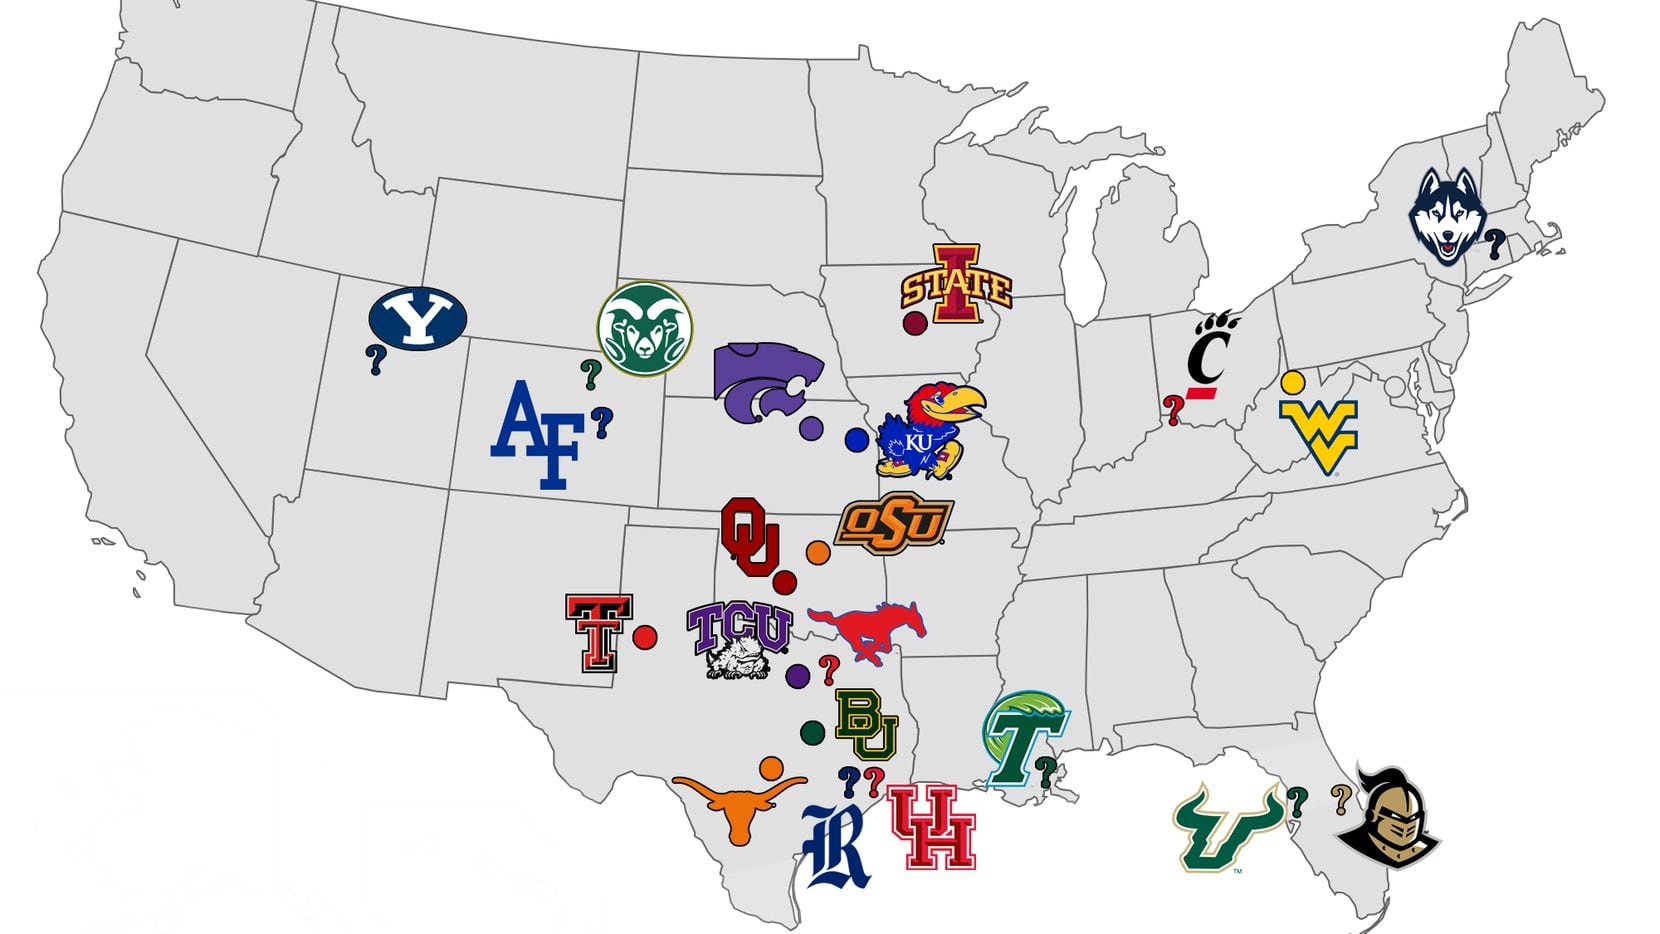 If the Big 12 does expand, which schools could join the conference?